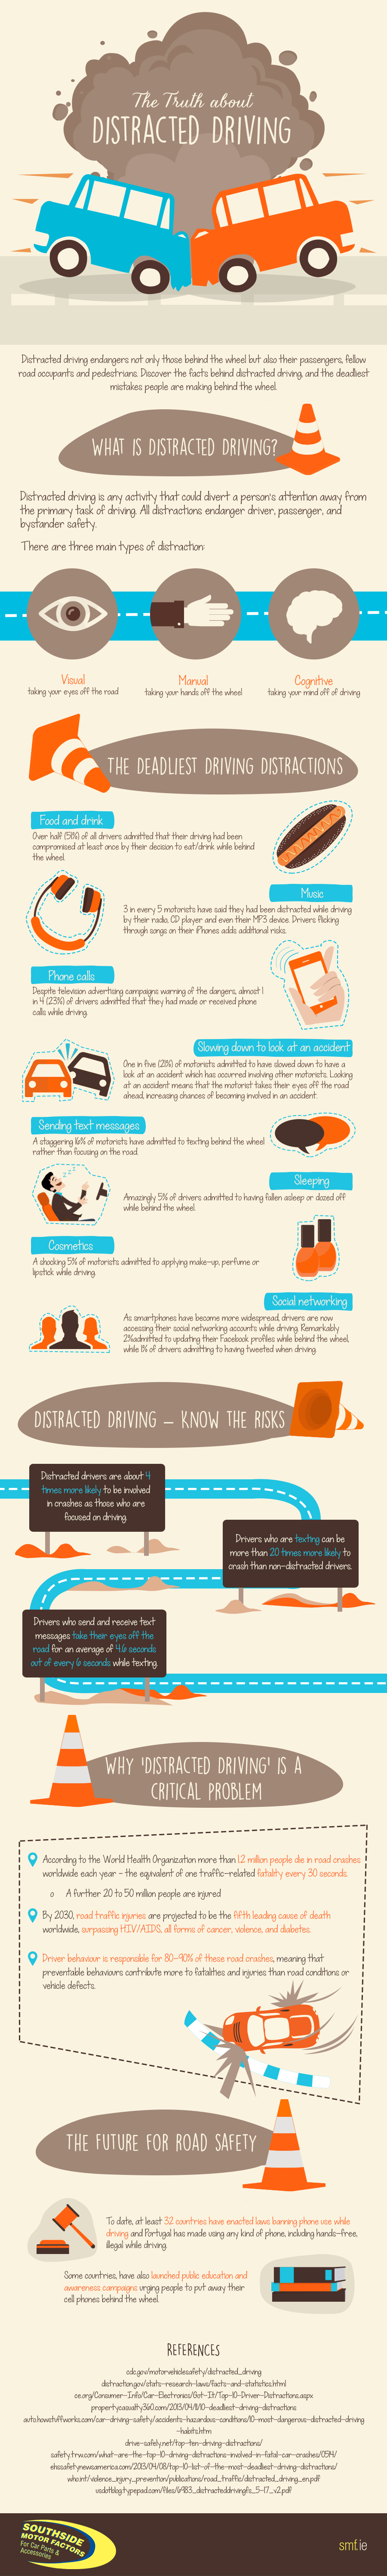 Distracted-Driving-Infographic